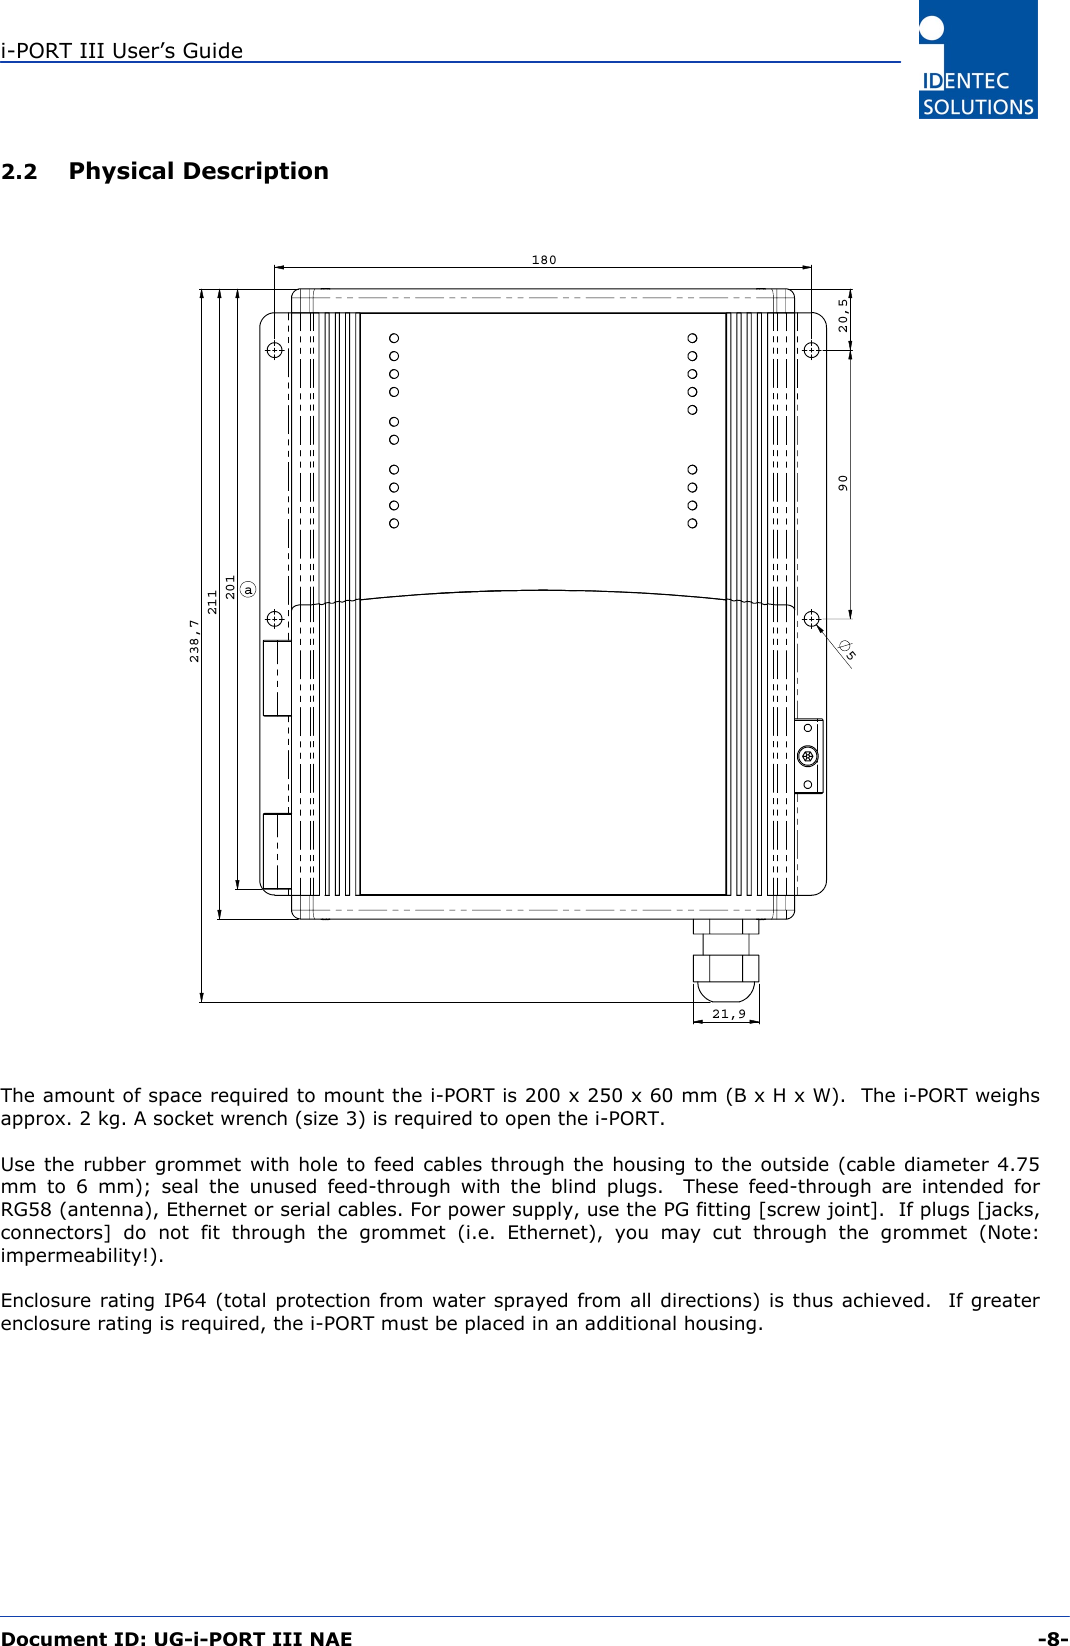 i-PORT III User’s Guide  Document ID: UG-i-PORT III NAE     -8-  2.2   Physical Description 211238,721,918020,5905201a The amount of space required to mount the i-PORT is 200 x 250 x 60 mm (B x H x W).  The i-PORT weighs approx. 2 kg. A socket wrench (size 3) is required to open the i-PORT.  Use the rubber grommet with hole to feed cables through the housing to the outside (cable diameter 4.75 mm to 6 mm); seal the unused feed-through with the blind plugs.  These feed-through are intended for RG58 (antenna), Ethernet or serial cables. For power supply, use the PG fitting [screw joint].  If plugs [jacks, connectors] do not fit through the grommet (i.e. Ethernet), you may cut through the grommet (Note: impermeability!).  Enclosure rating IP64 (total protection from water sprayed from all directions) is thus achieved.  If greater enclosure rating is required, the i-PORT must be placed in an additional housing. 